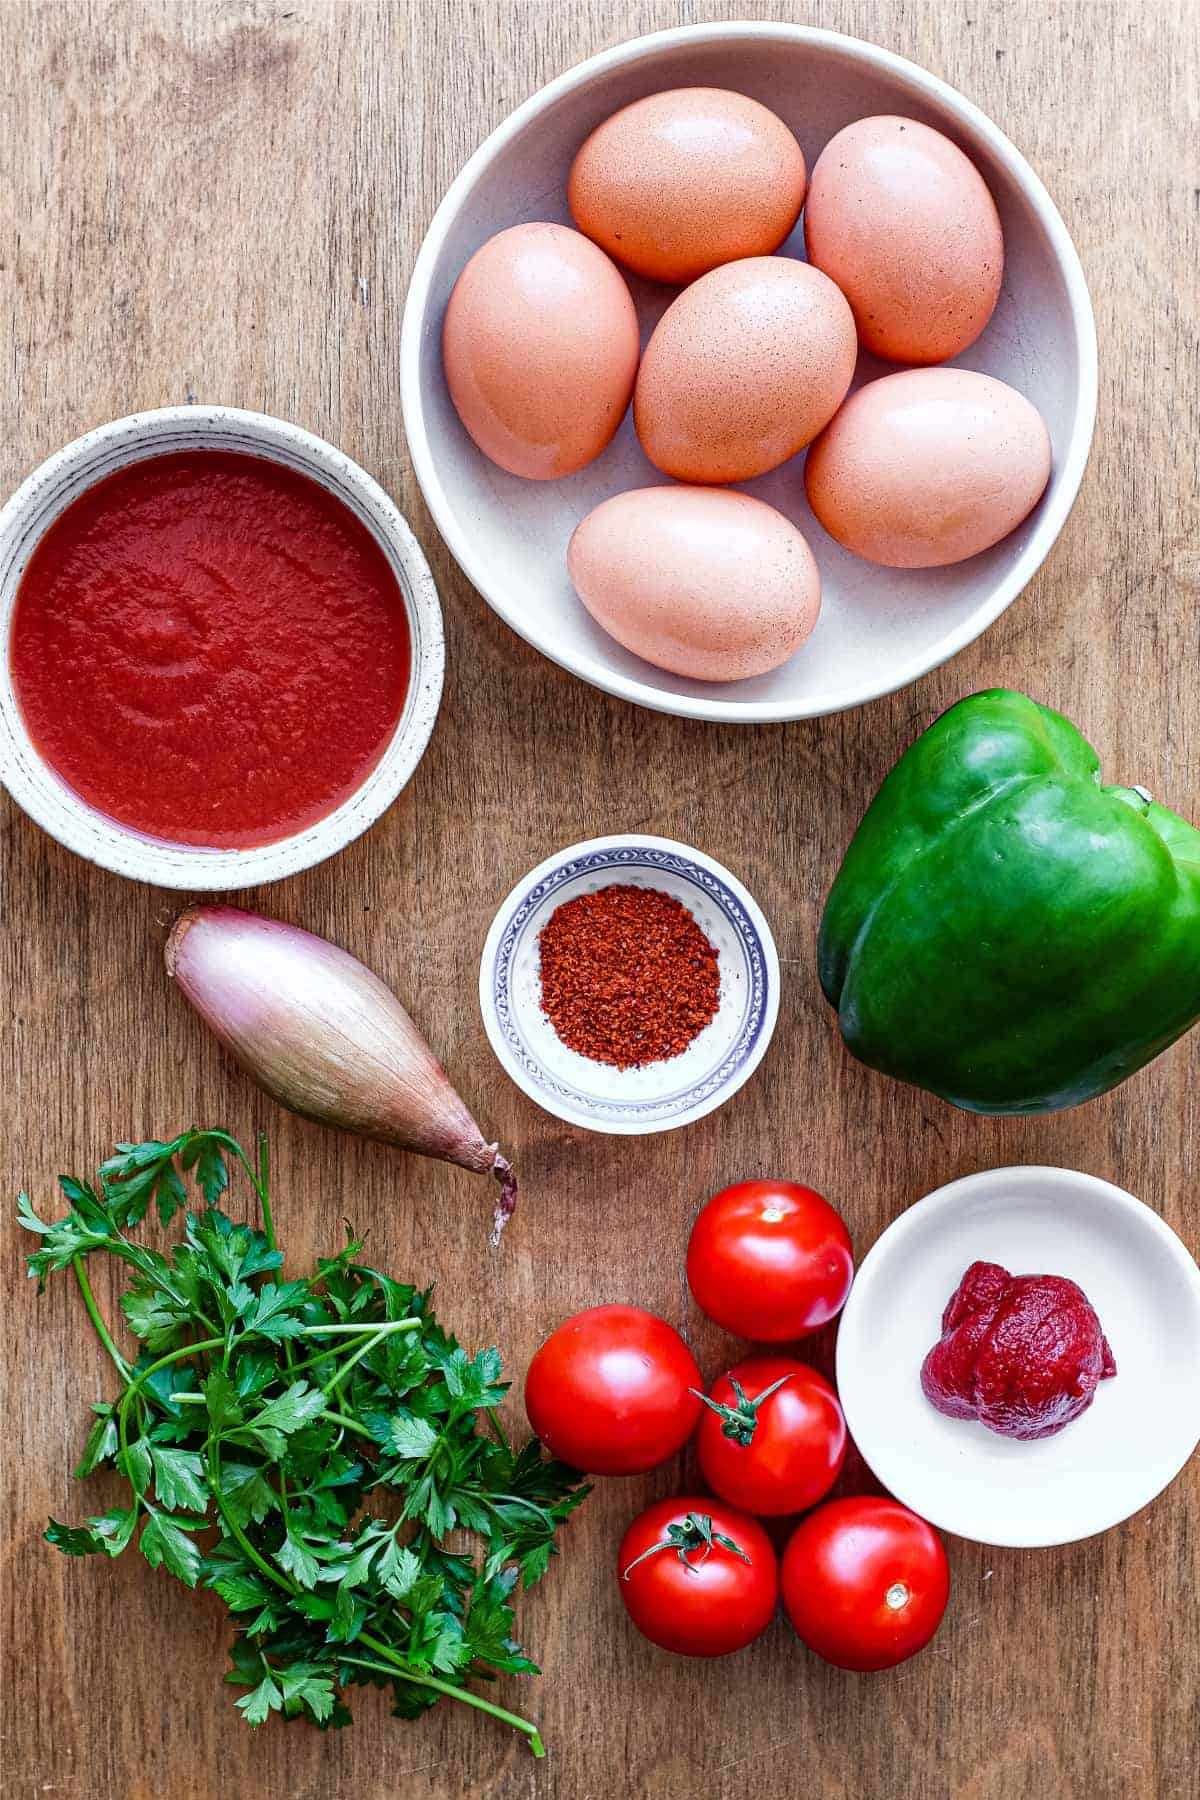 The ingredients for Turkish menemen: eggs, tomatoes, tomato concentrate, tomato passata, green bell pepper, parsley, shallot and Aleppo pepper